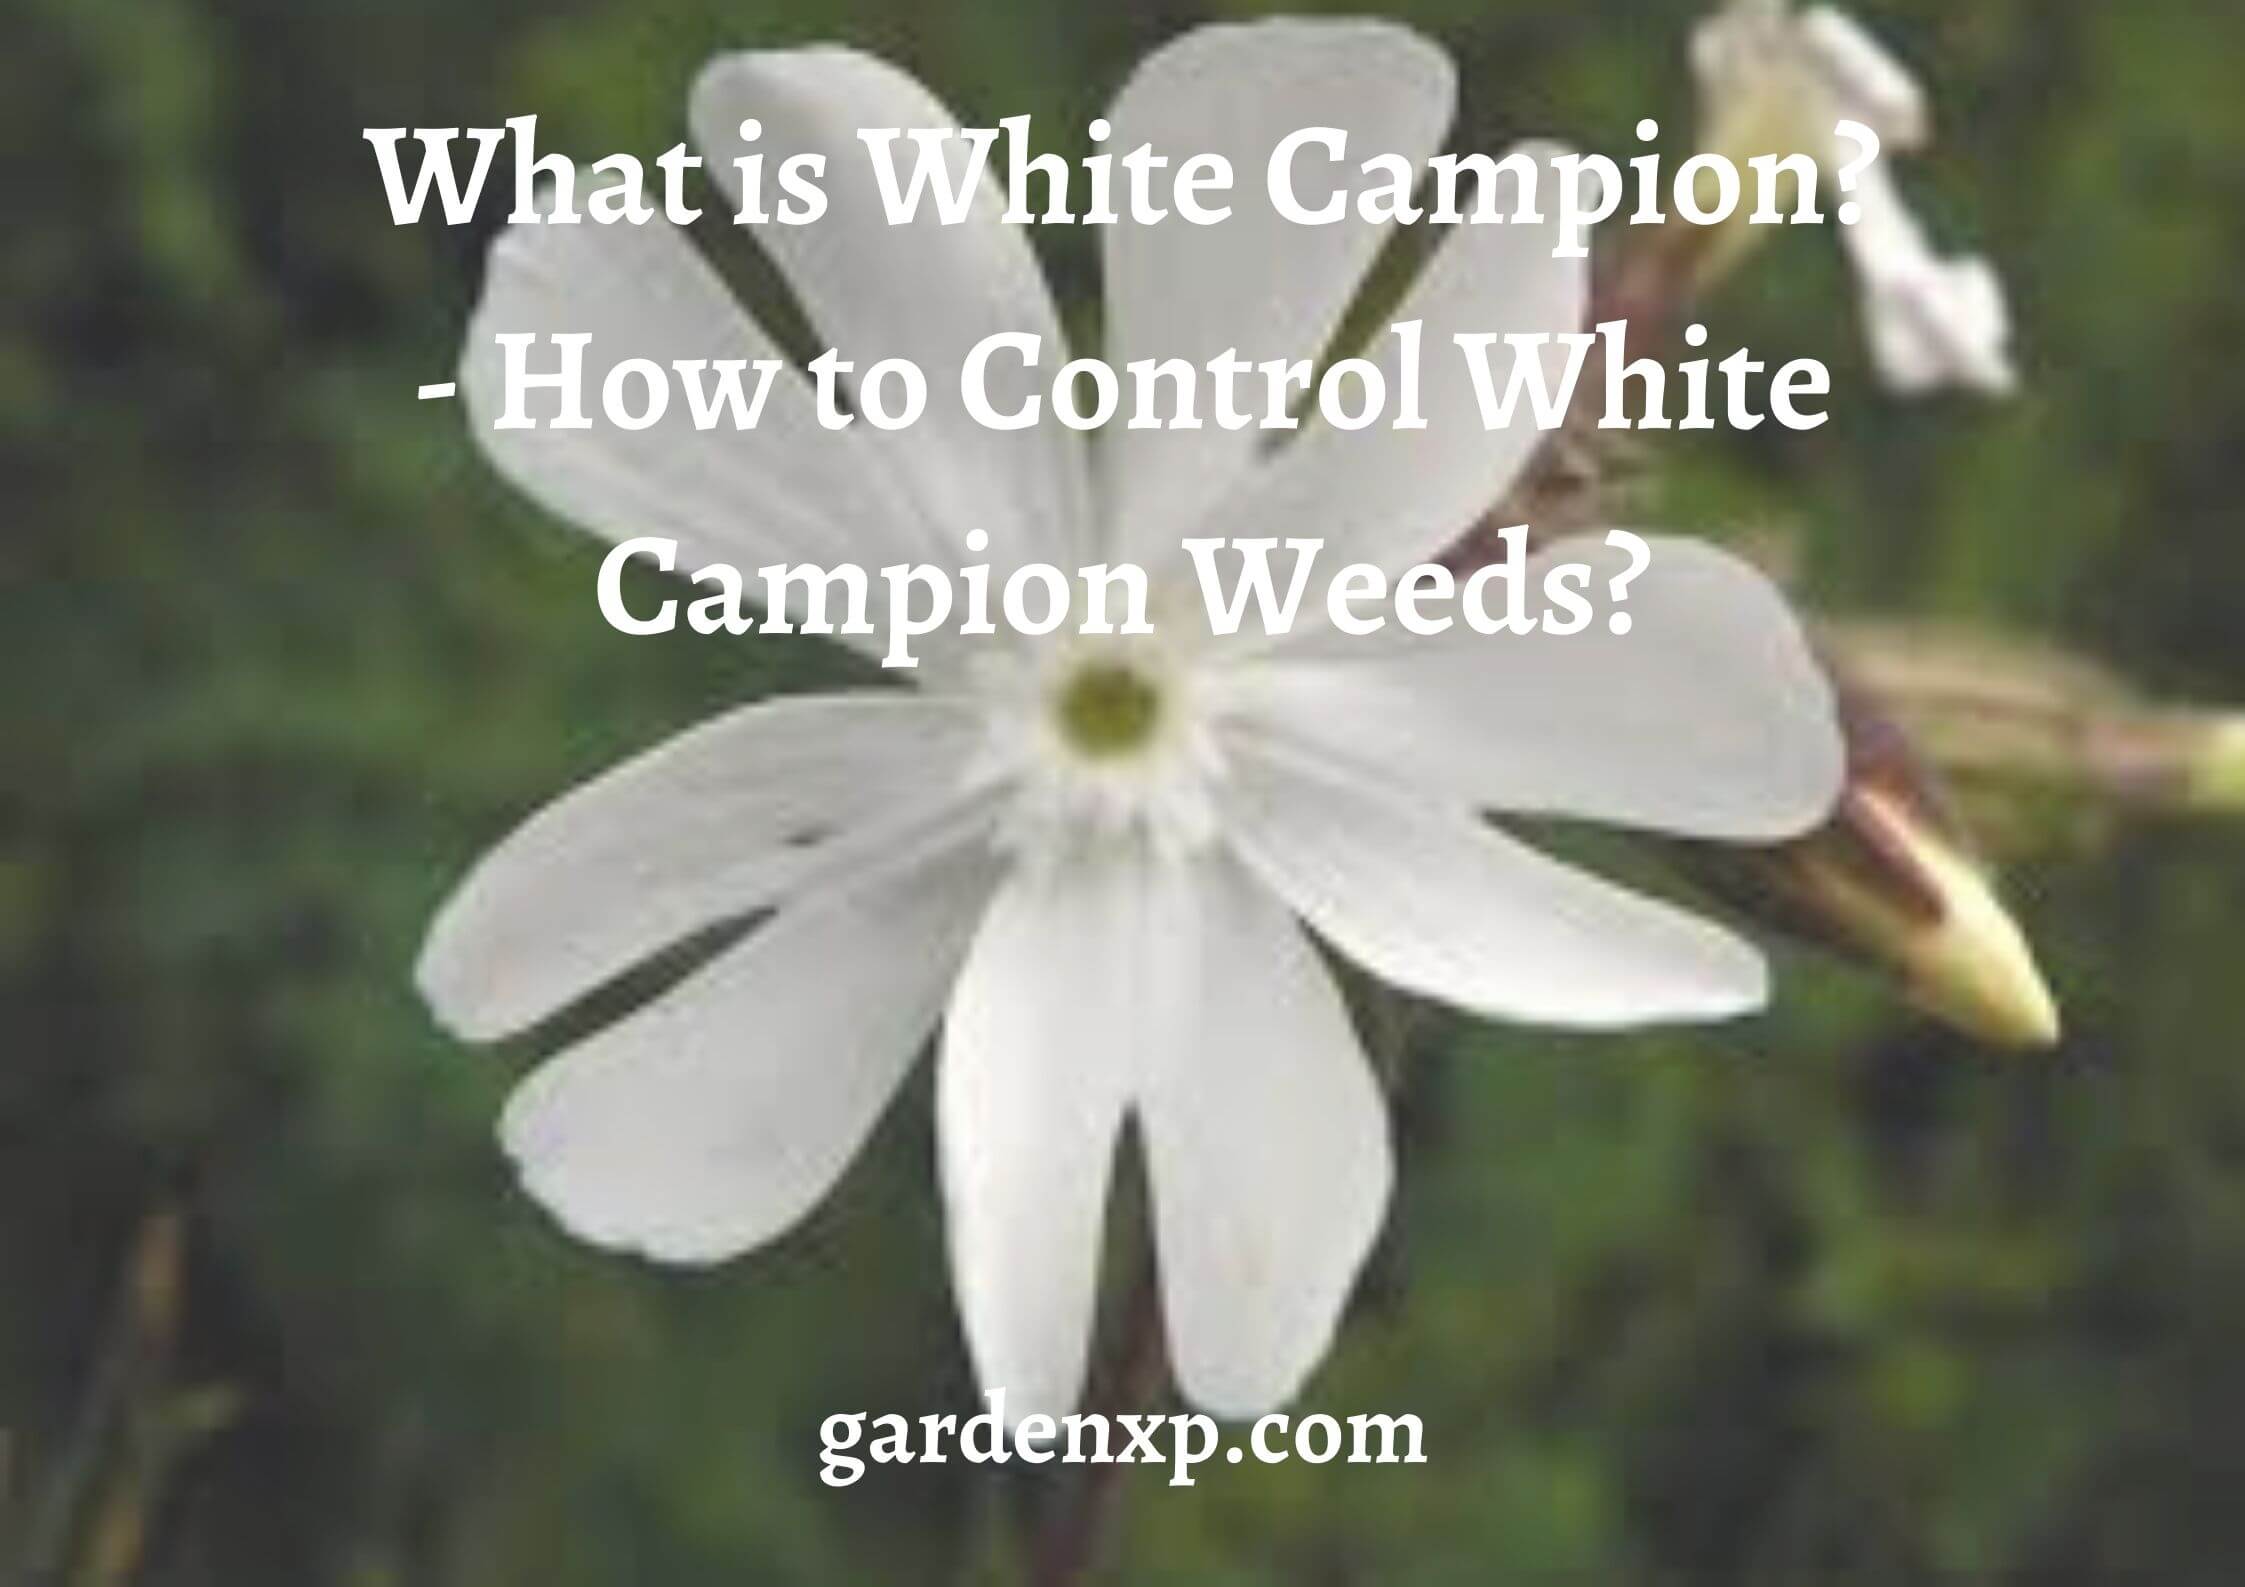 What is White Campion? - How to Control White Campion Weeds?